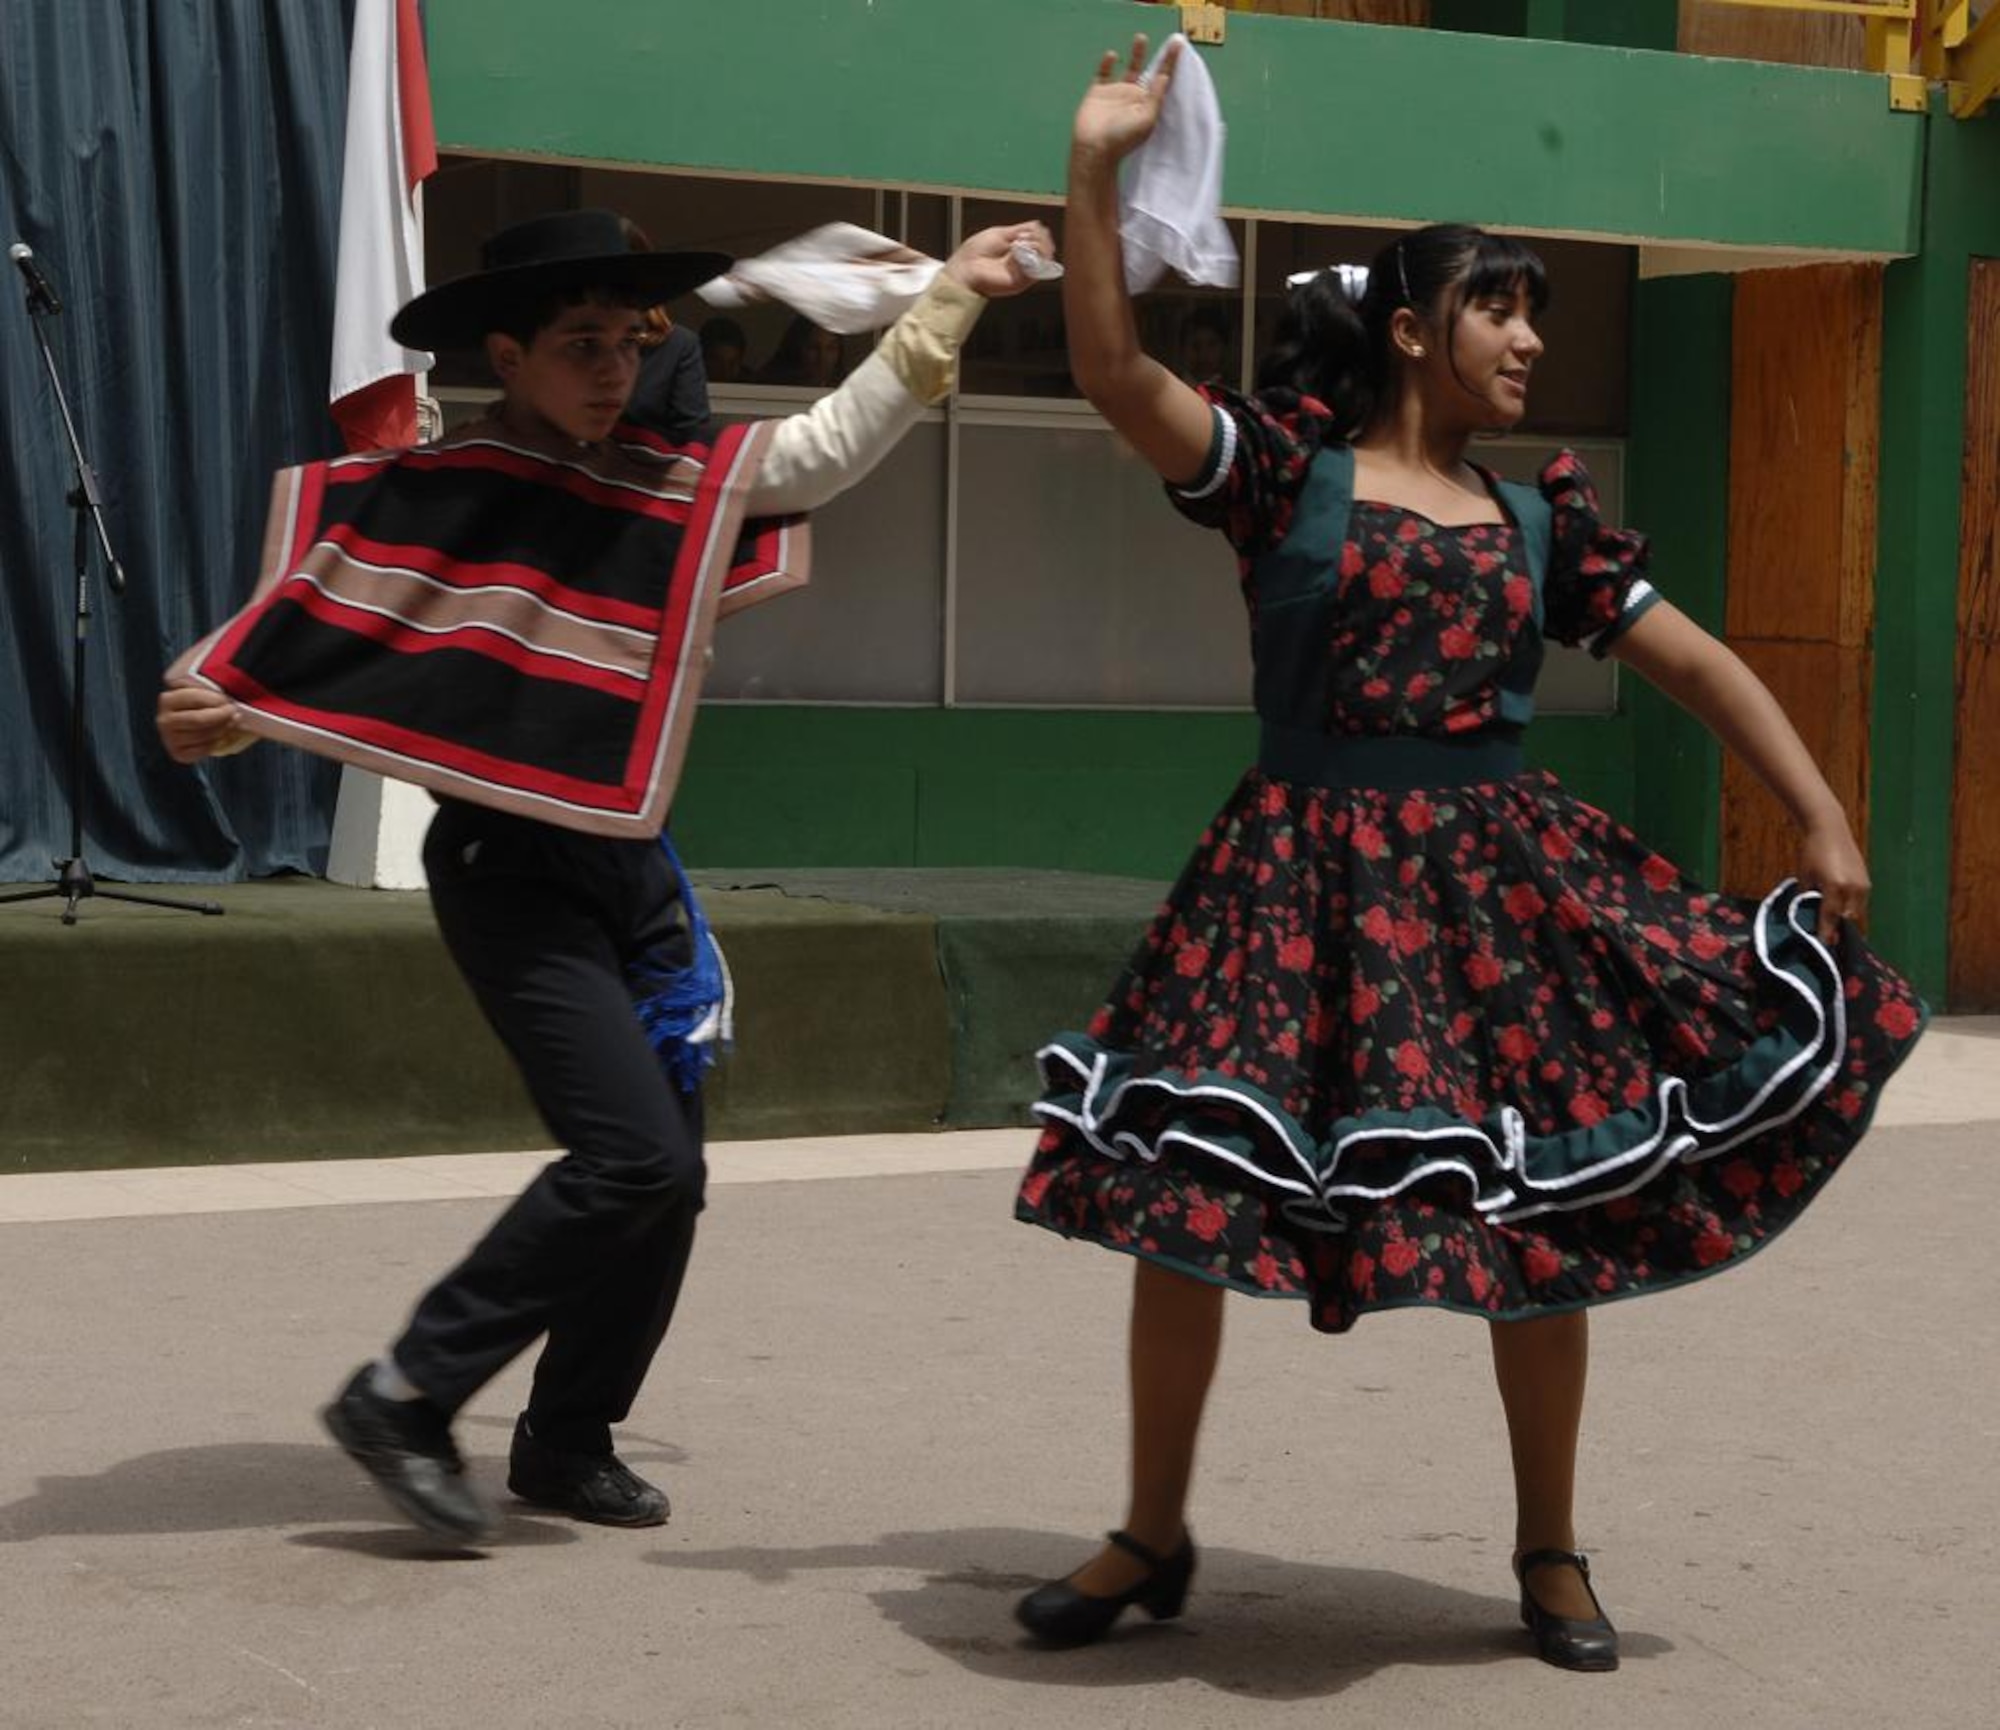 IQUIQUE, Chile -- Students of Colegio Macaya in Alto Hospicia, Chile perform a traditional dance recital Oct. 27 as part of a welcoming ceremony for visiting U.S. and Chilean Airmen.  (U.S. Air Force photo by Tech. Sgt. Eric Petosky)